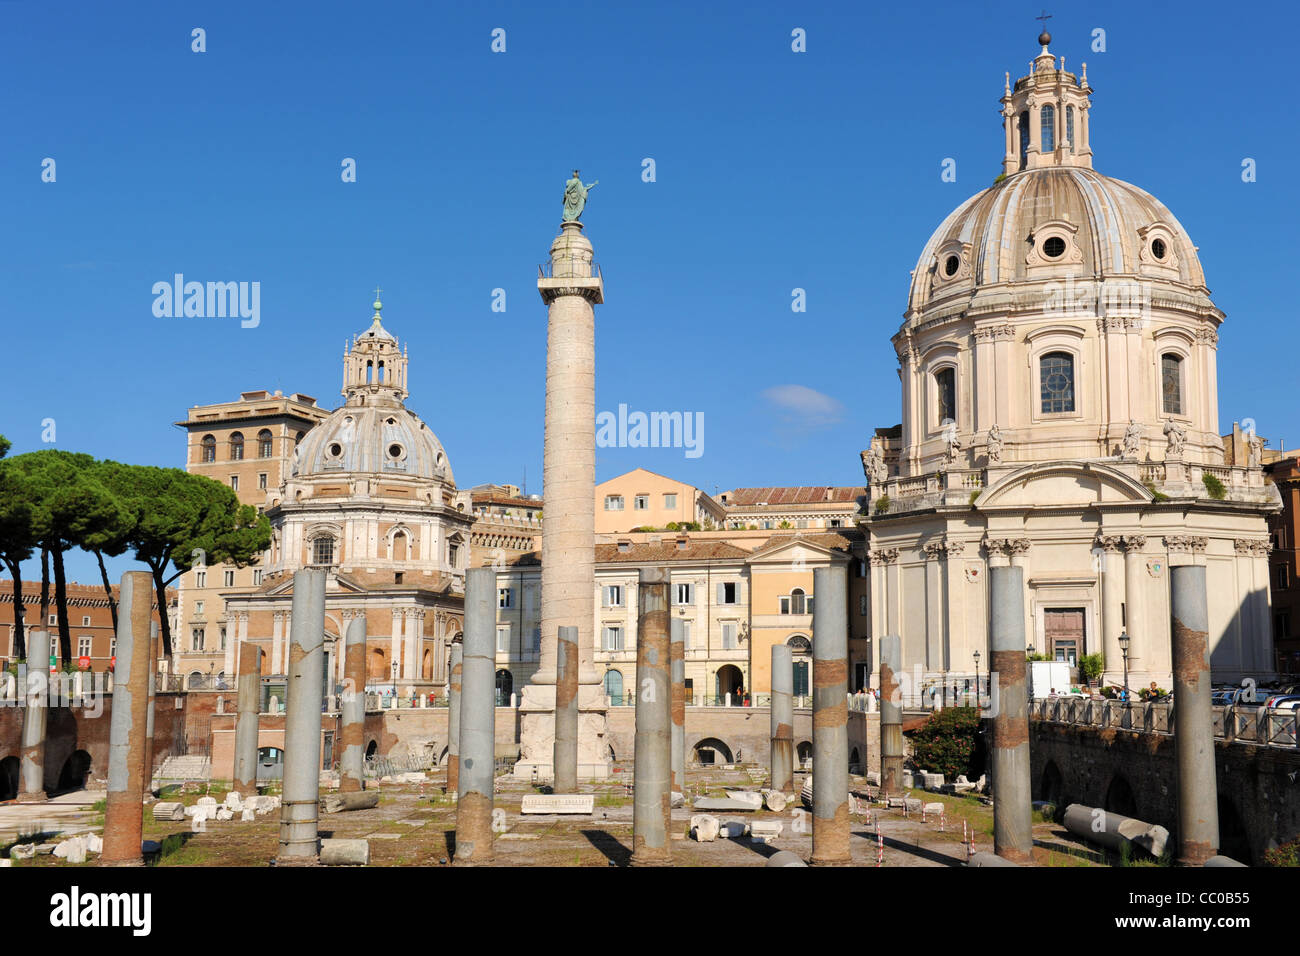 Temple Of Trajan imperial forum in Rome Stock Photo